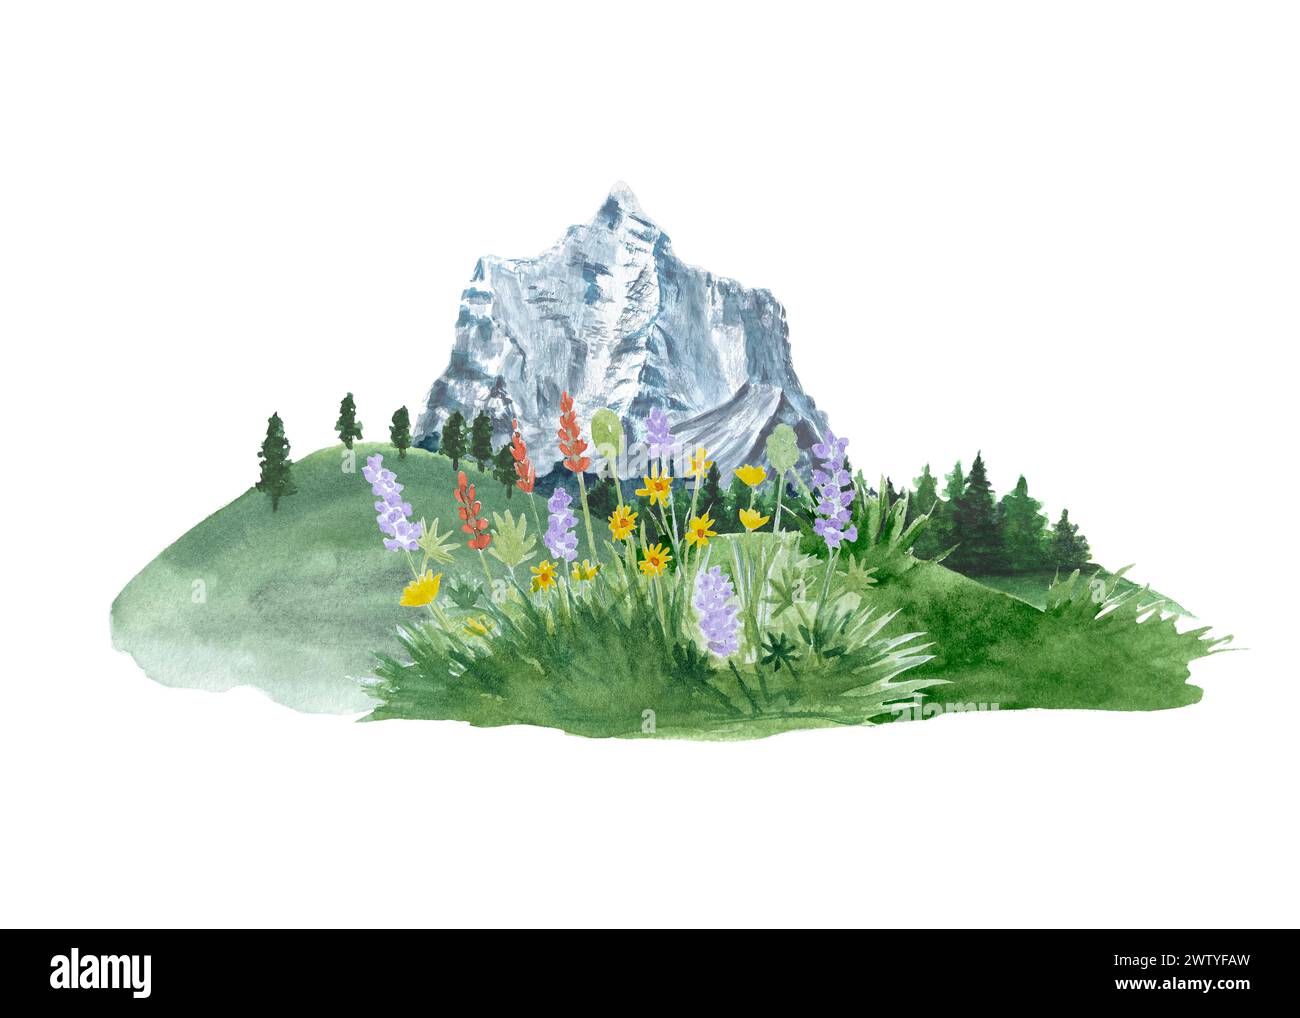 Watercolor composition of wild flowers, hills, trees and a mountain in a natural landscape Stock Photo